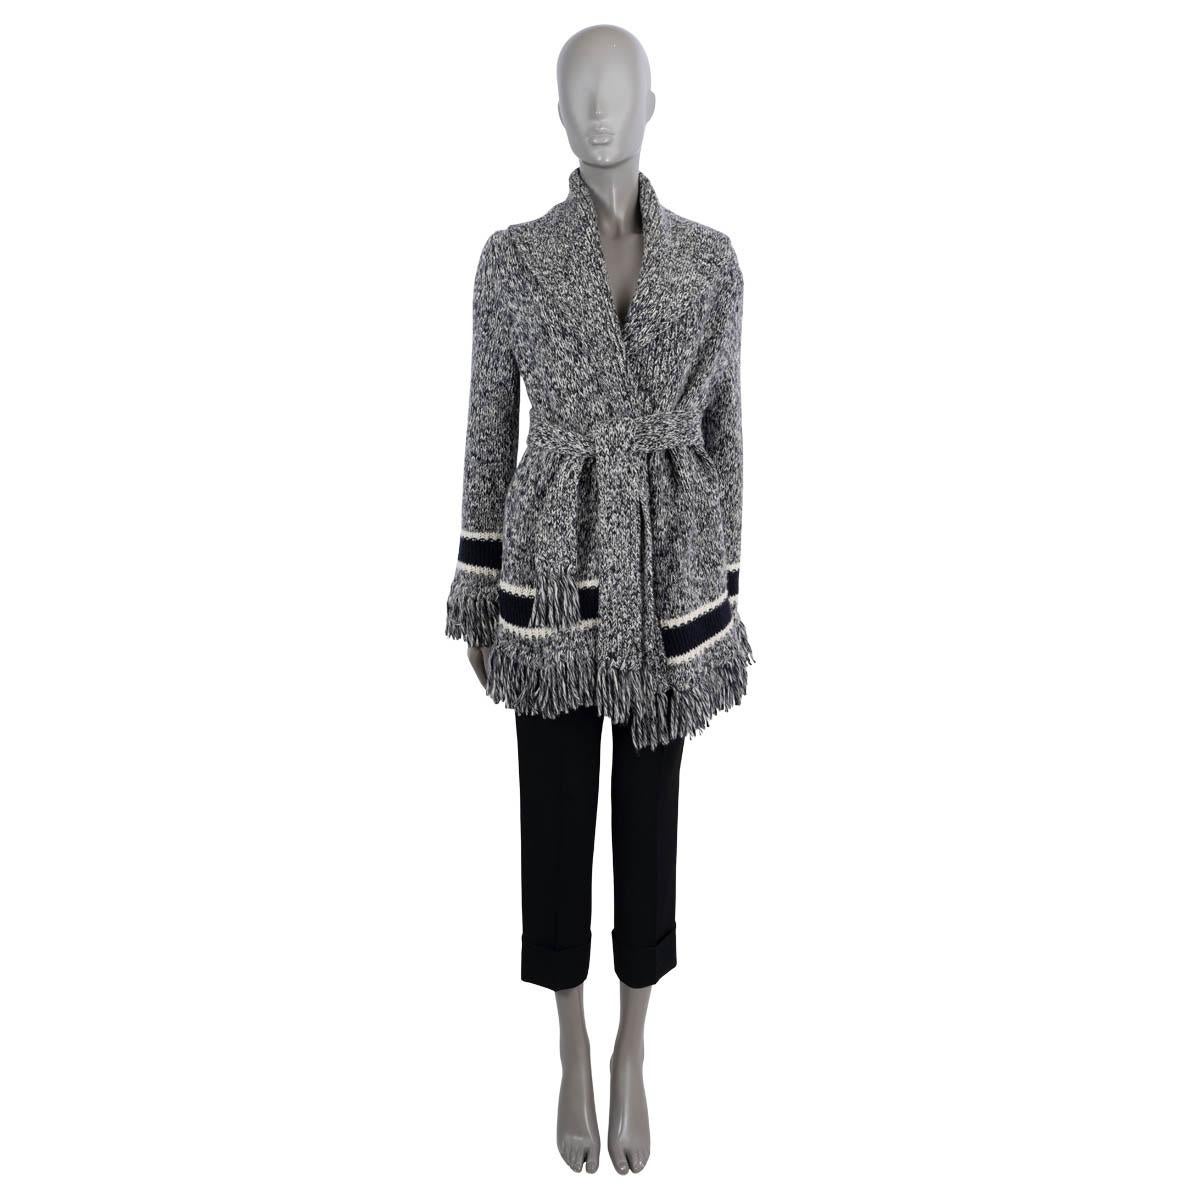 100% authentic Christian Dior mélange belted oversized wrap cardigan in midnight blue and white wool (70%) and cashmere (30%). Features a wide shawl collar, fringed bottom hem, cuffs and belt ends, navy blue and white stripe at the cuffs and bottom